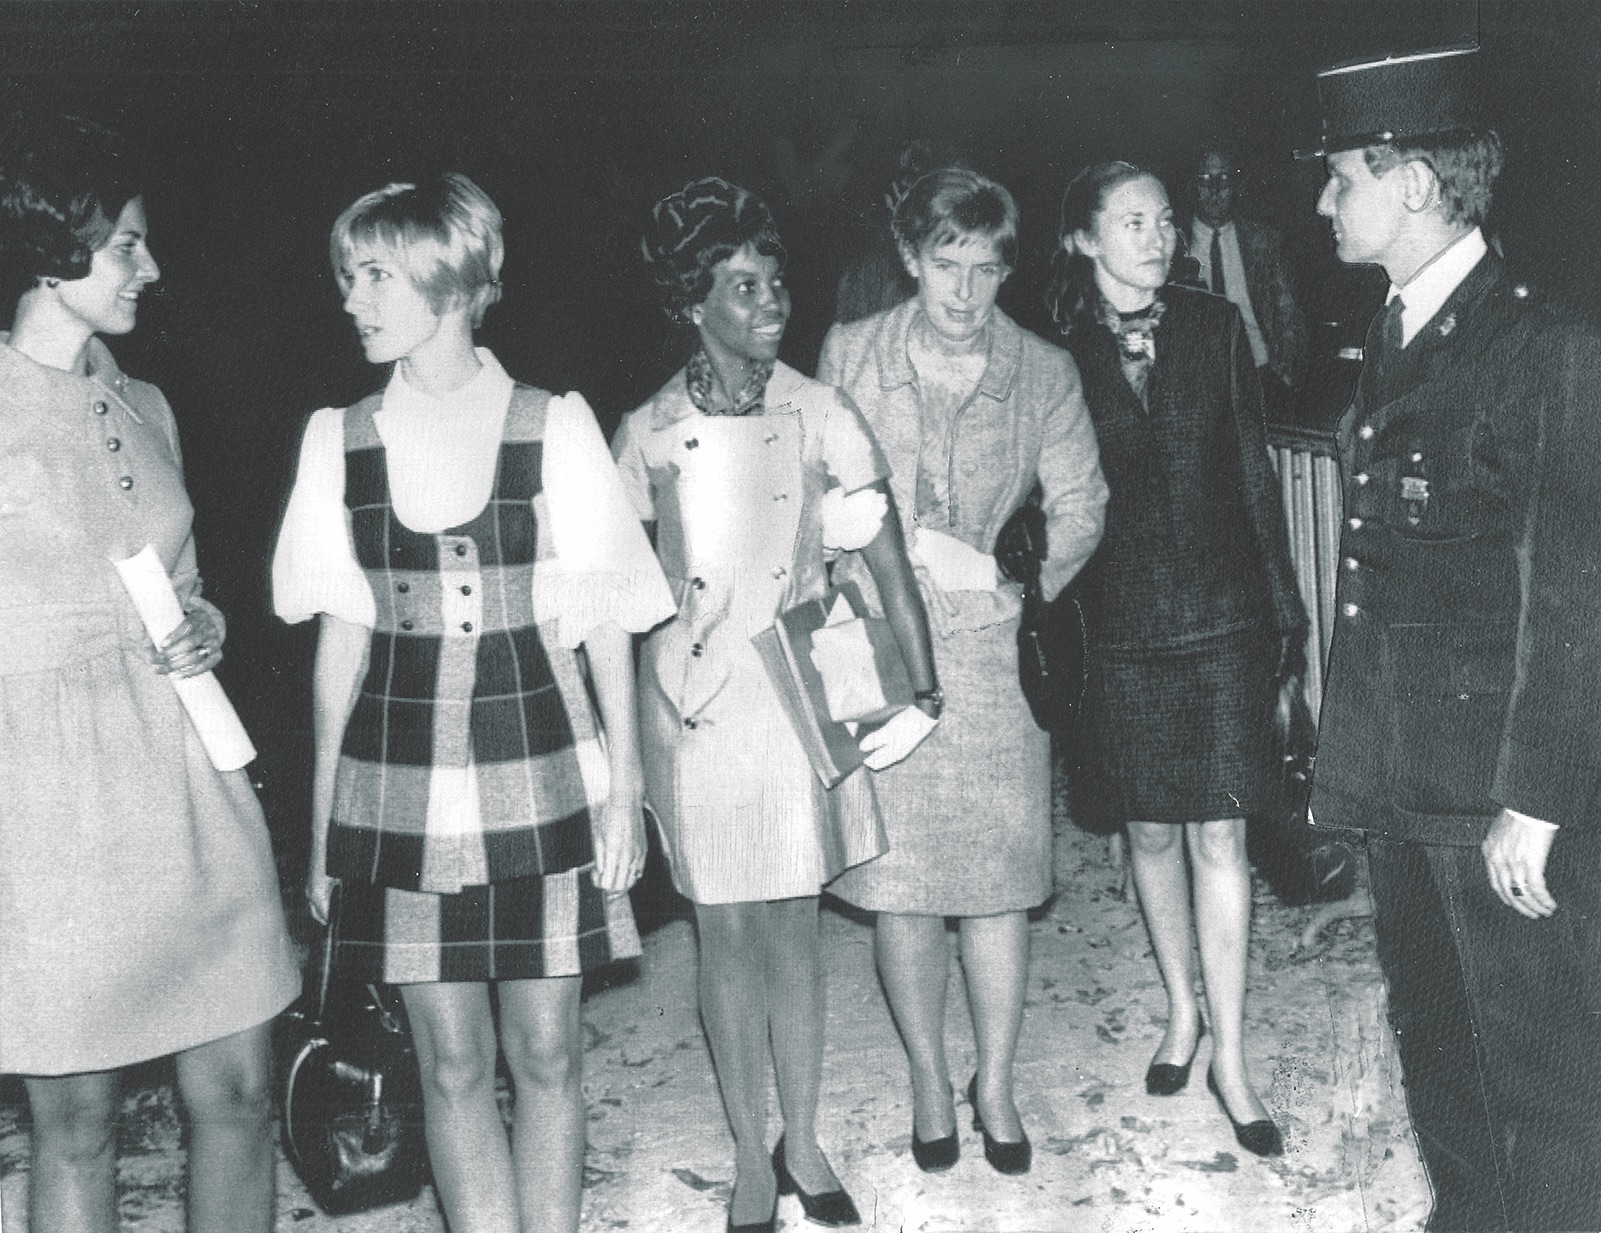 A delegation of POW wives who met with North Vietnamese officials in Paris on Oct. 4, 1969, left the meeting without the information they sought. From left are Ruth Ann Perisho, Candy Parish, Andrea Rander, Sybil Stockdale and Pat Mearns. (UPI/Bettmann Archive/Getty Images)